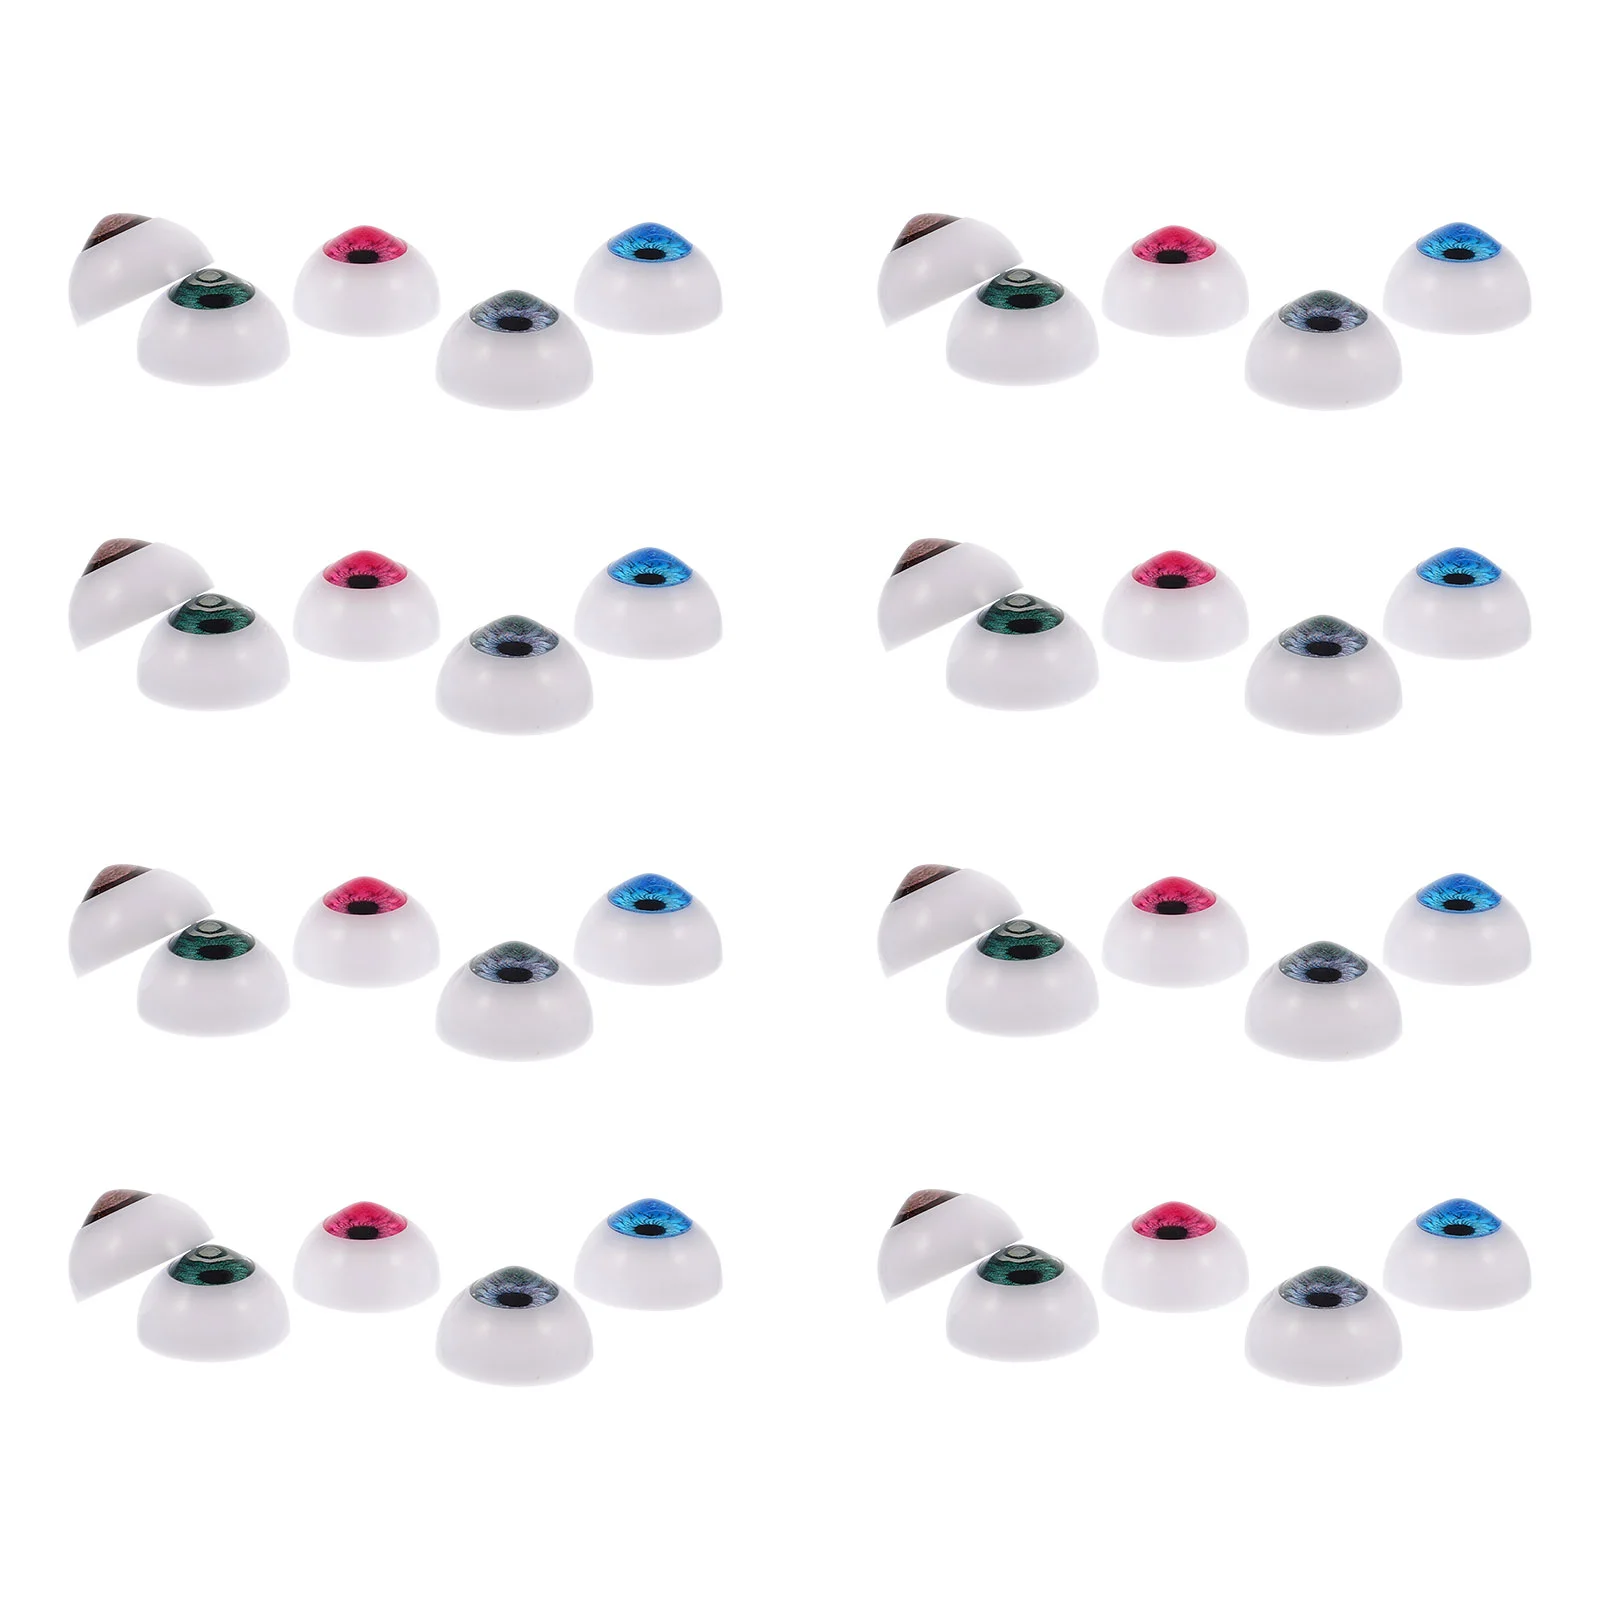 50 Pcs Decor Artificial Eyes DIY Material Halloween Props Realistic Acrylic Eyeball Eyeballs Craft Supplies Crafts professional acrylic paints set 12 18 24 36 colors 12ml hand painted wall drawing craft painting pigment set art supplies